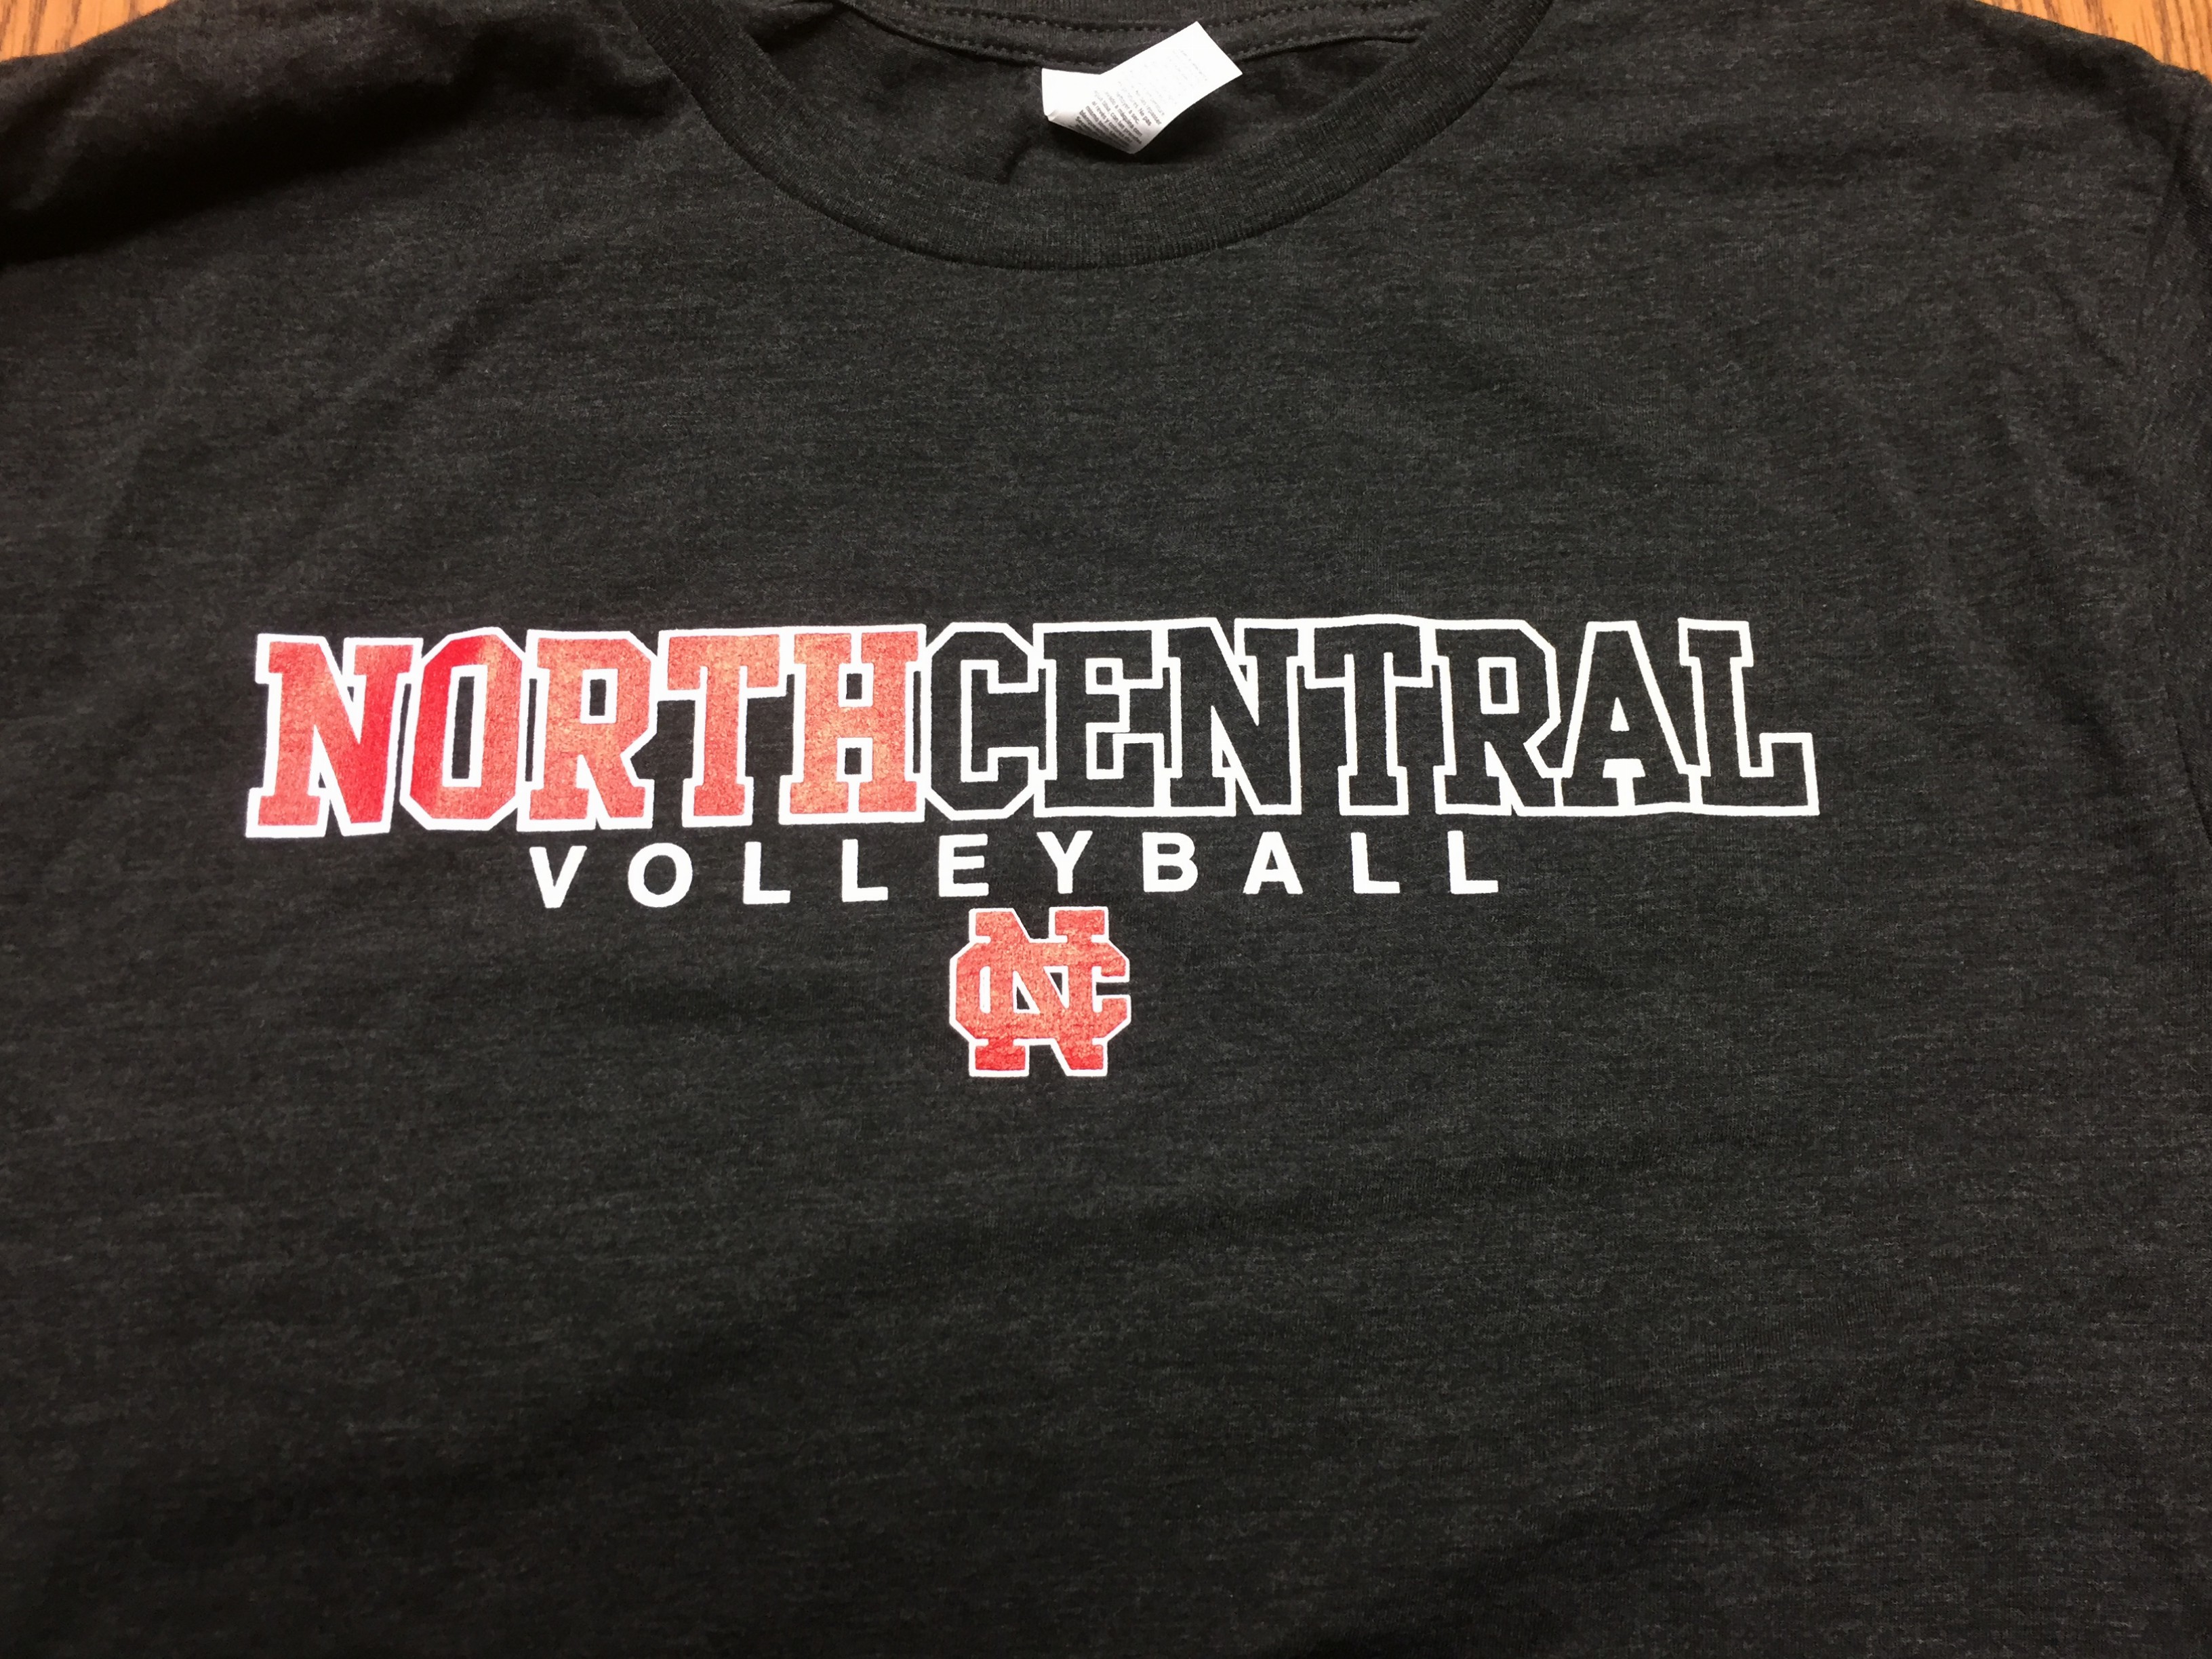 North Central Volleyball